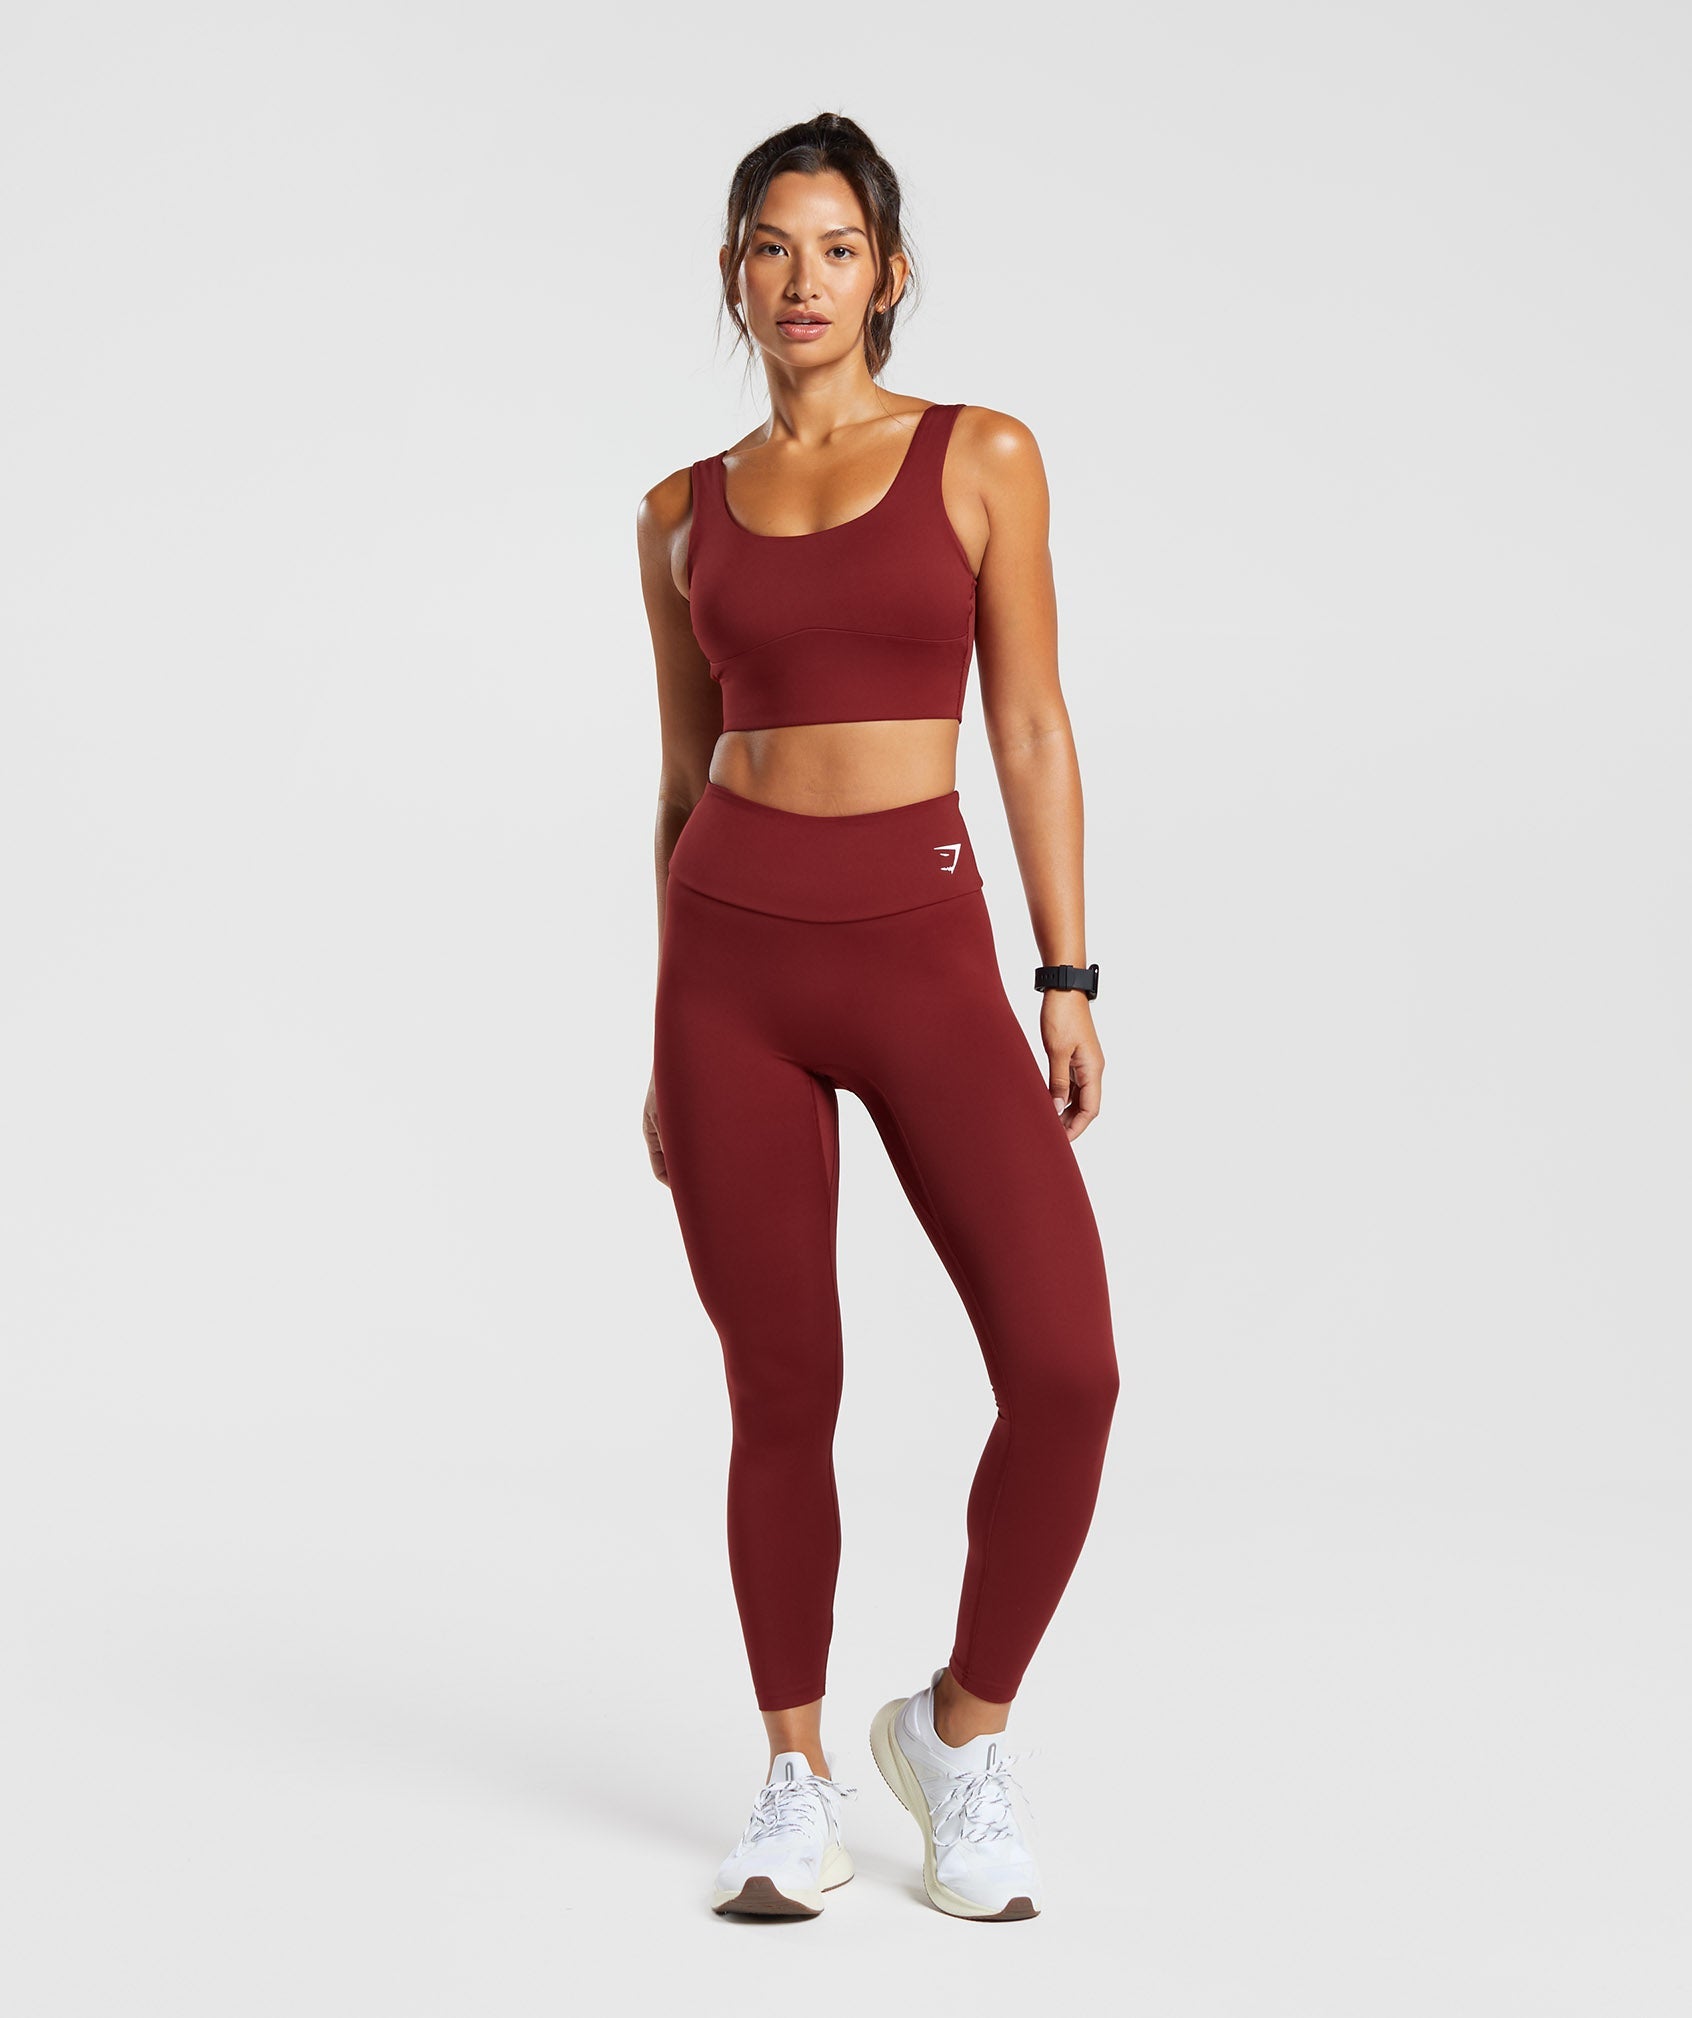 Longline Sports Bra in Spiced Red - view 4